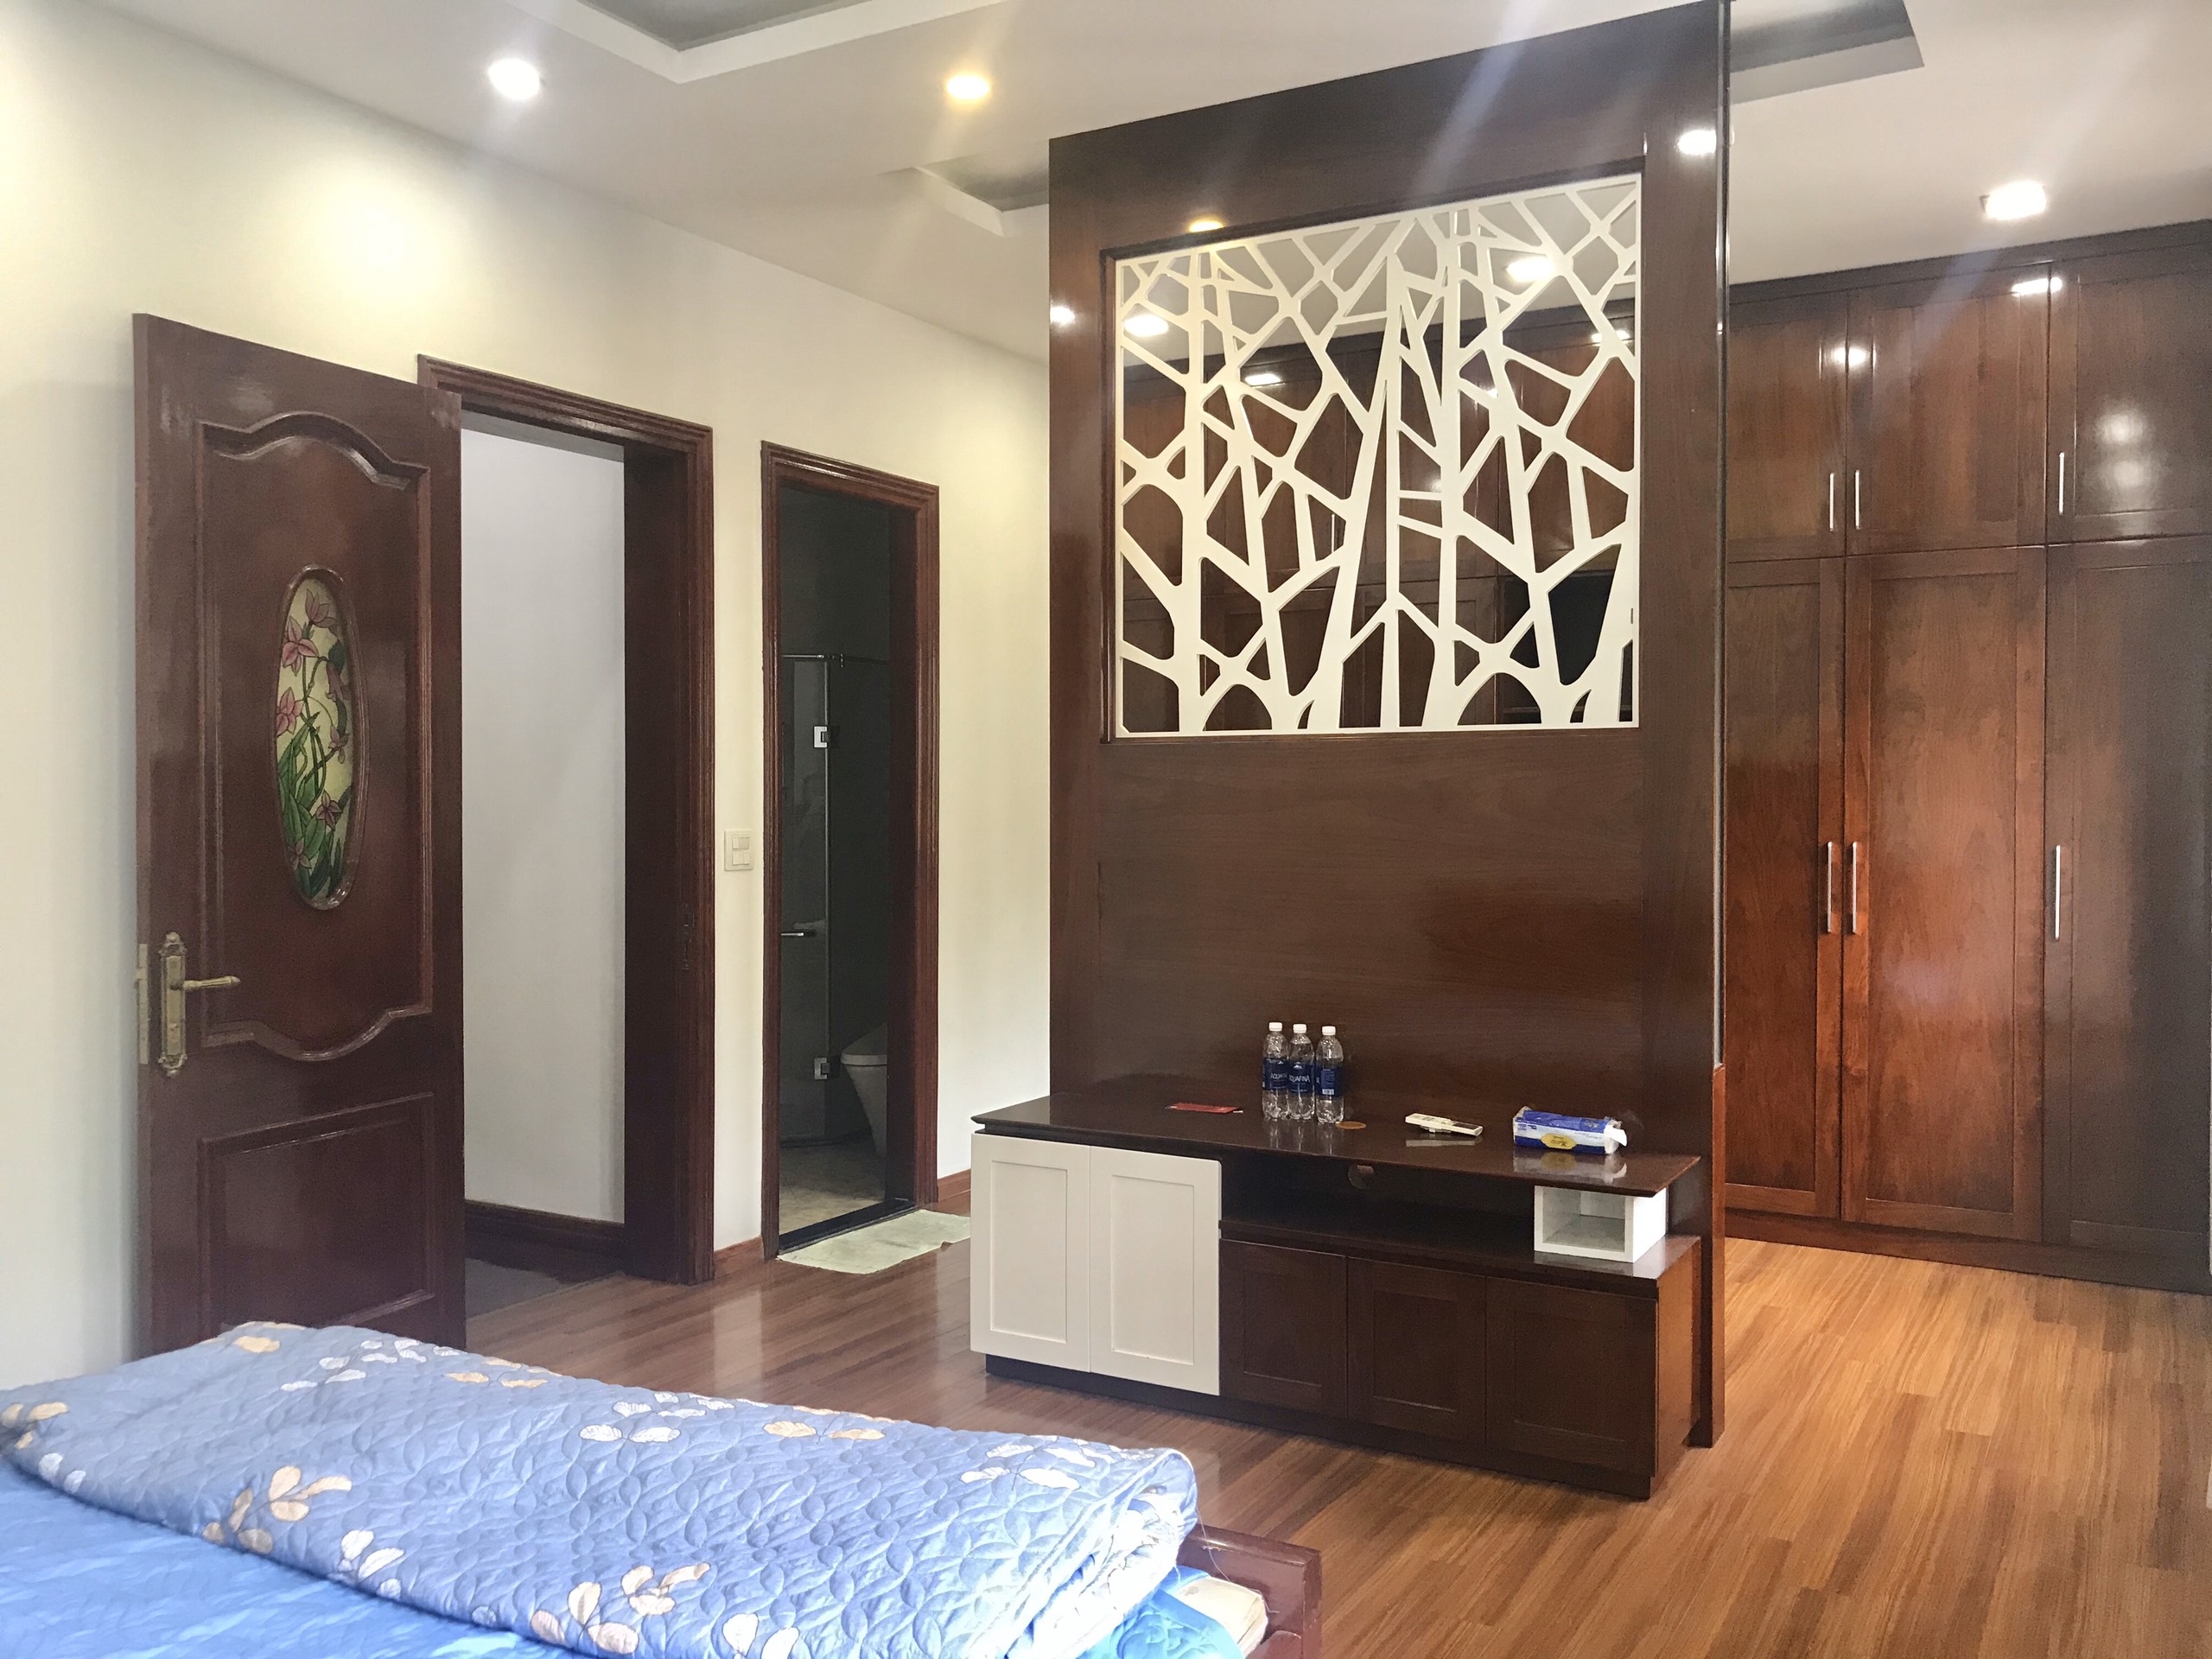 HOA PHUONG VINHOMES RIVERSIDE VILLAS FOR SALE WITH 4BR 6